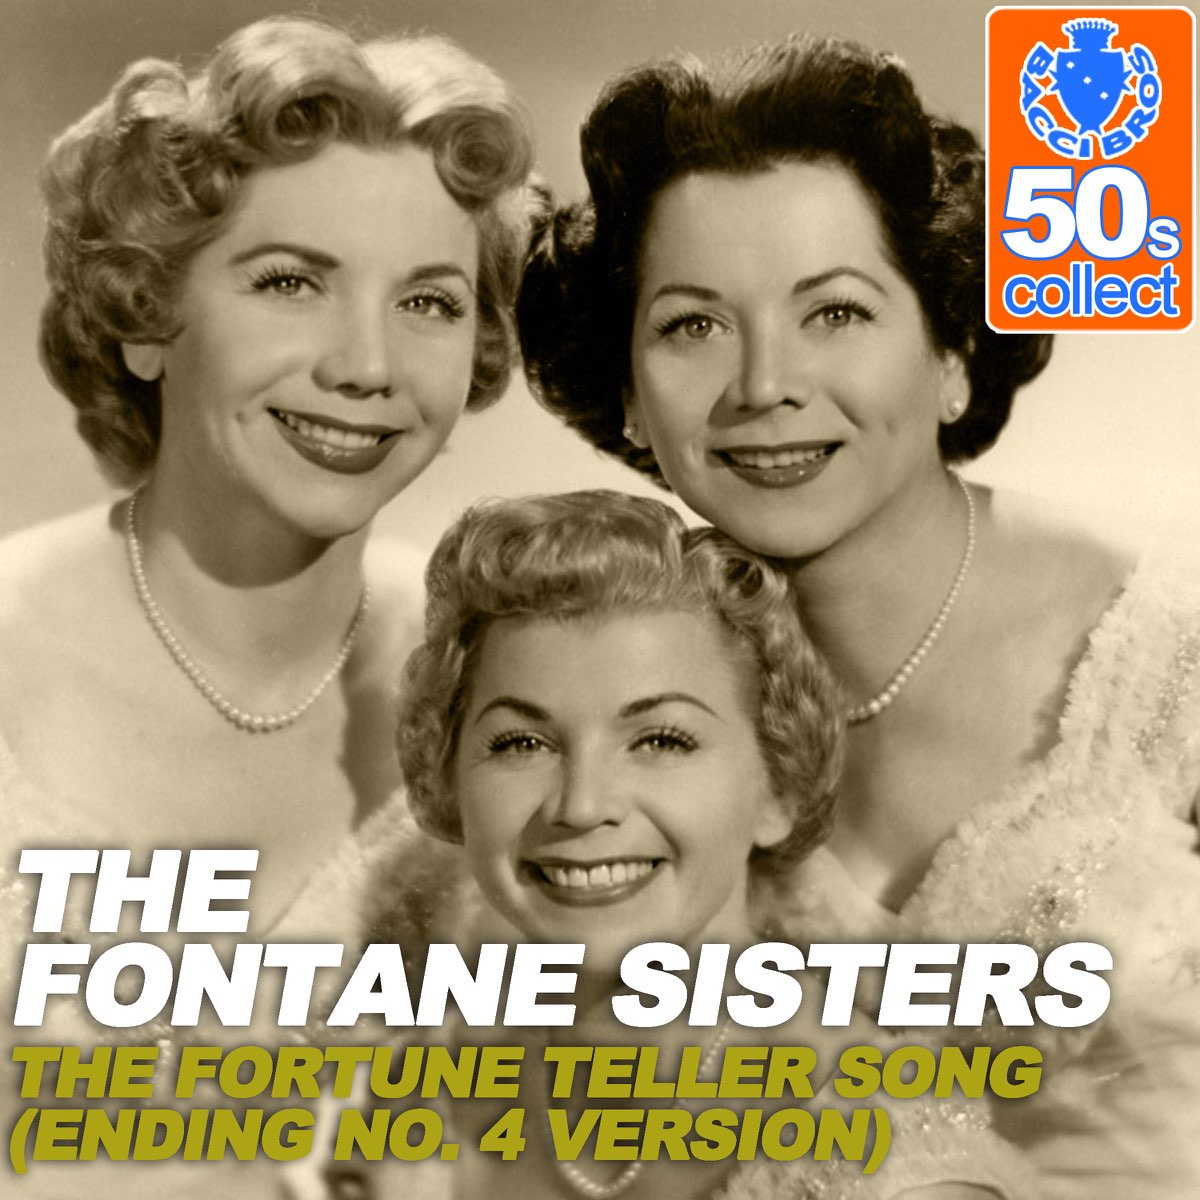 ‎The Fortune Teller Song (Remastered) [Ending No. 4 Version] - Single ...